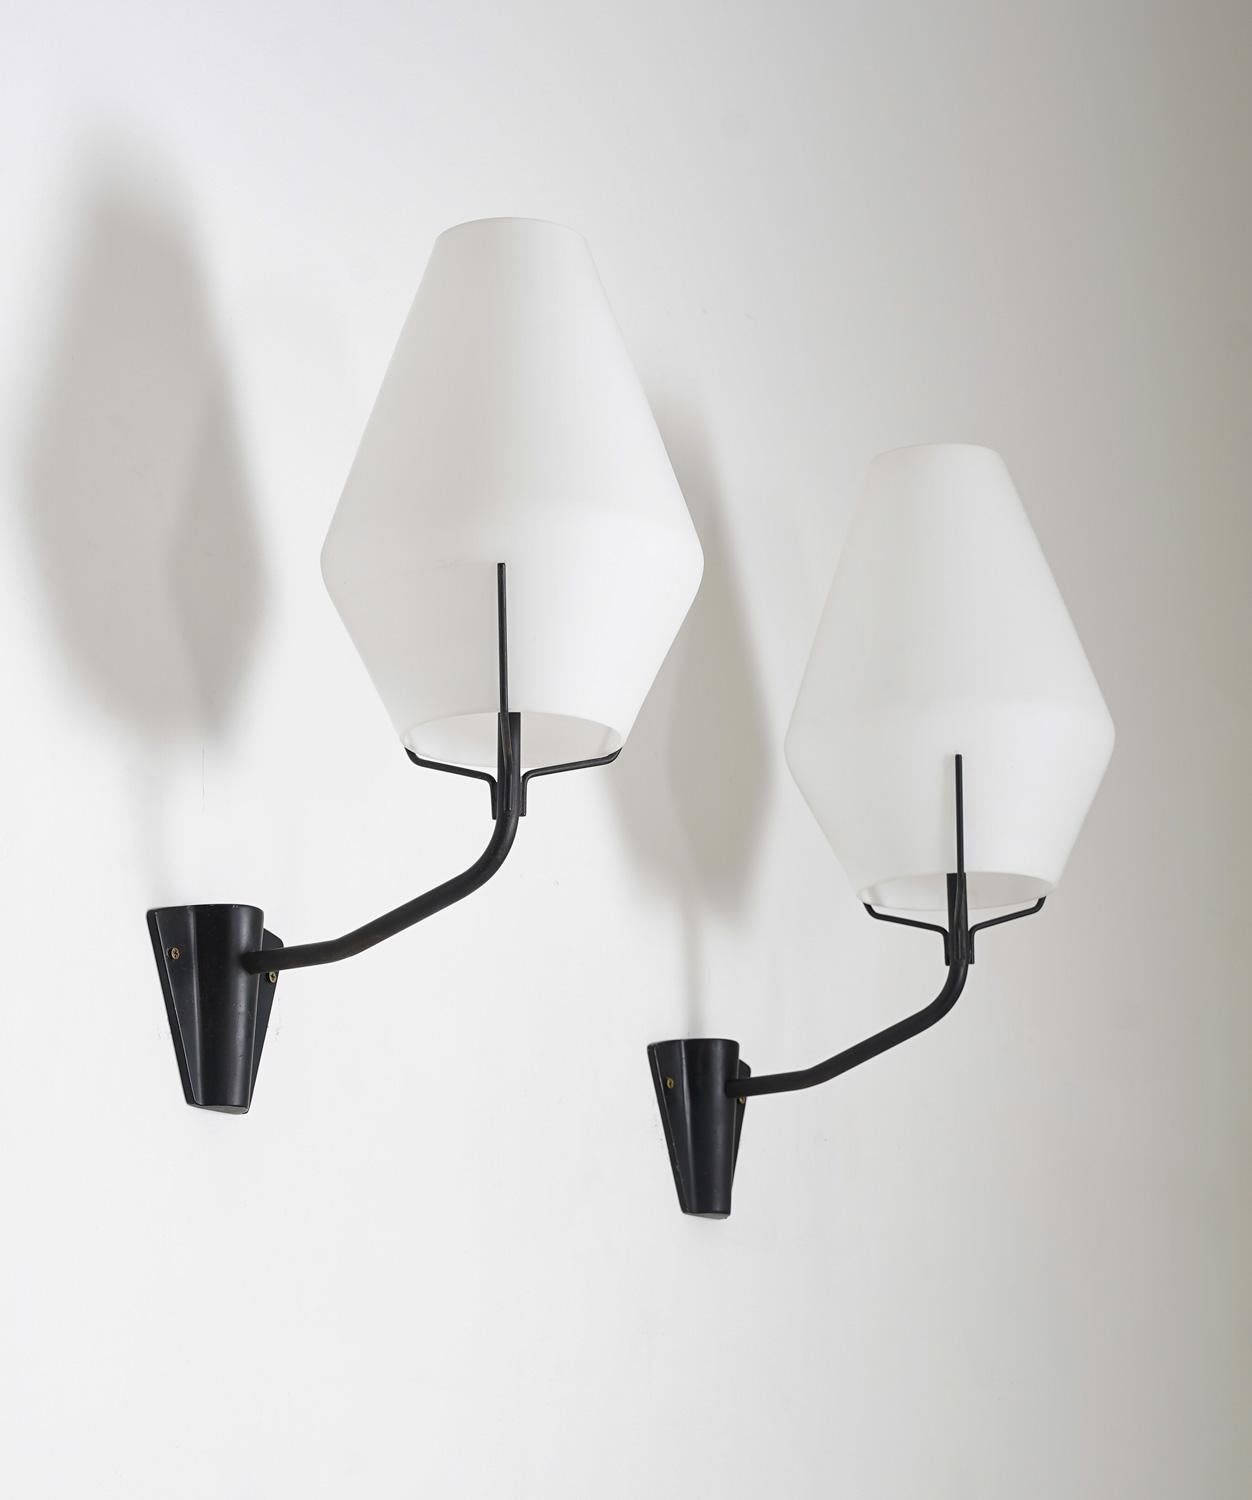 Wall lights manufactured by ASEA, Sweden, circa 1950.
Each lamp features one light source, hidden by a large frosted opaline glass shade. The shades are elegantly kept in place by three thin metal rods. 

Condition: Very good original